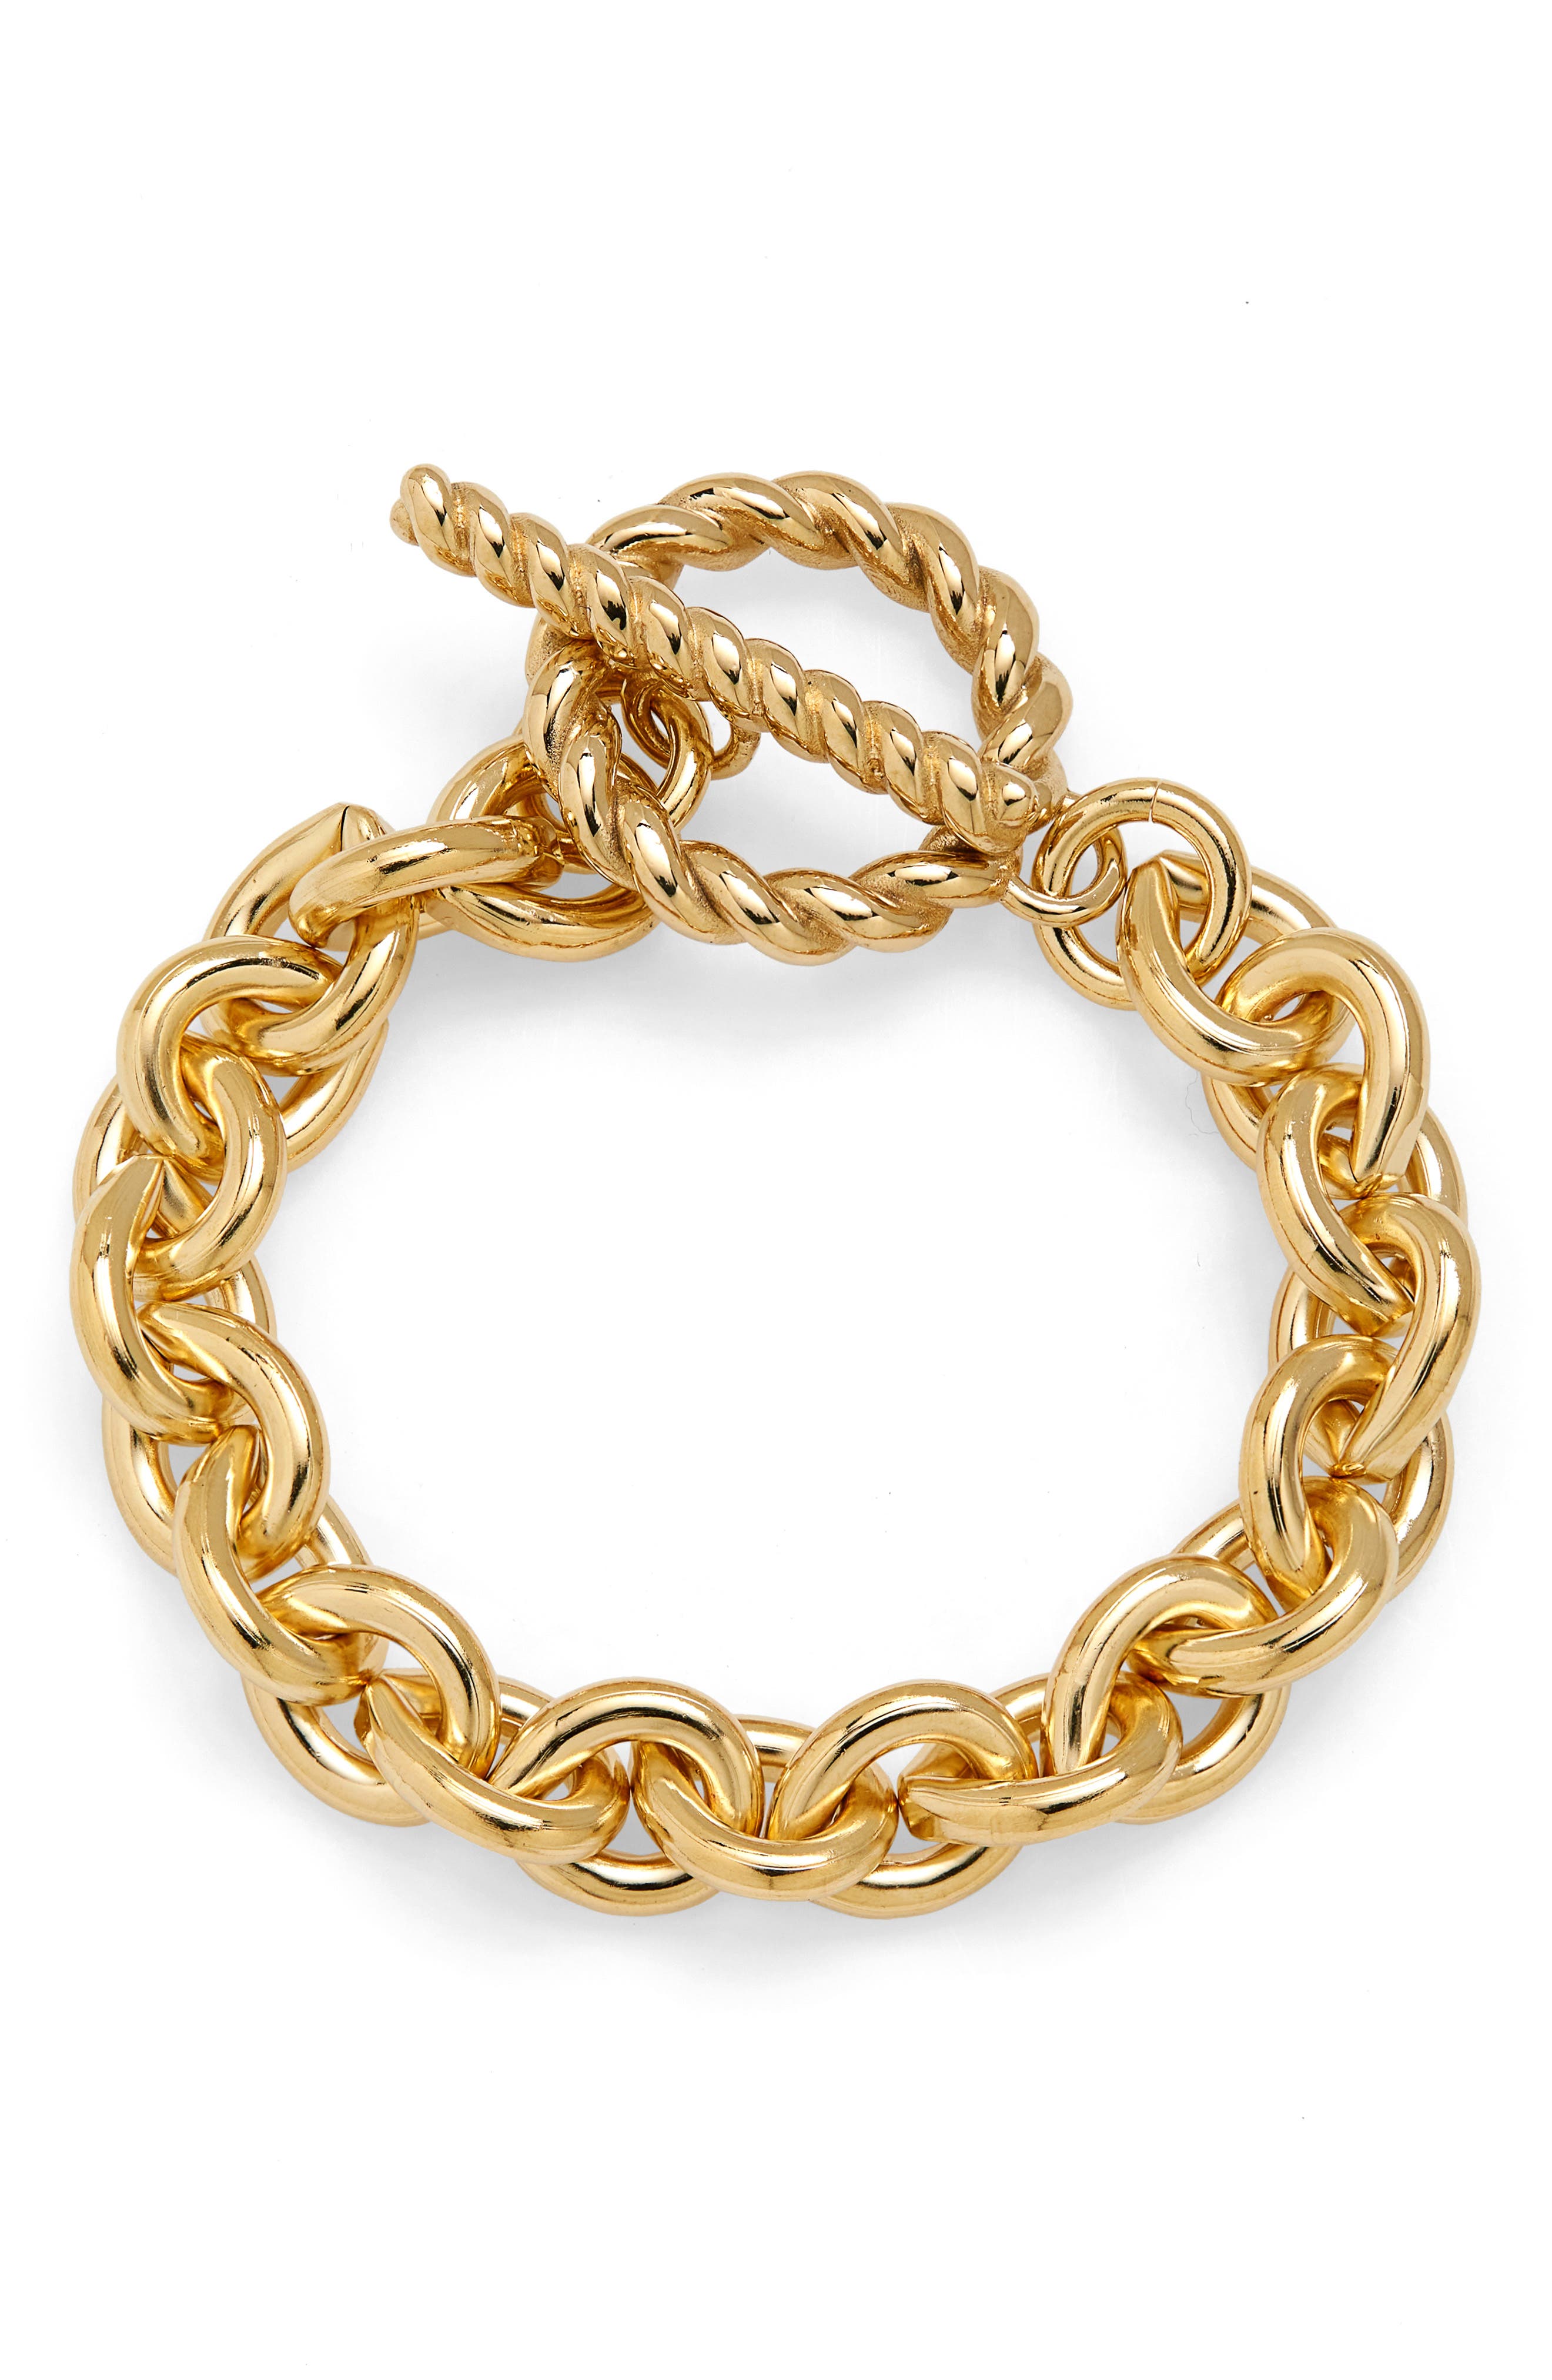 Laura Lombardi Braided Toggle Chain Bracelet in Brass at Nordstrom, Size 7 Us